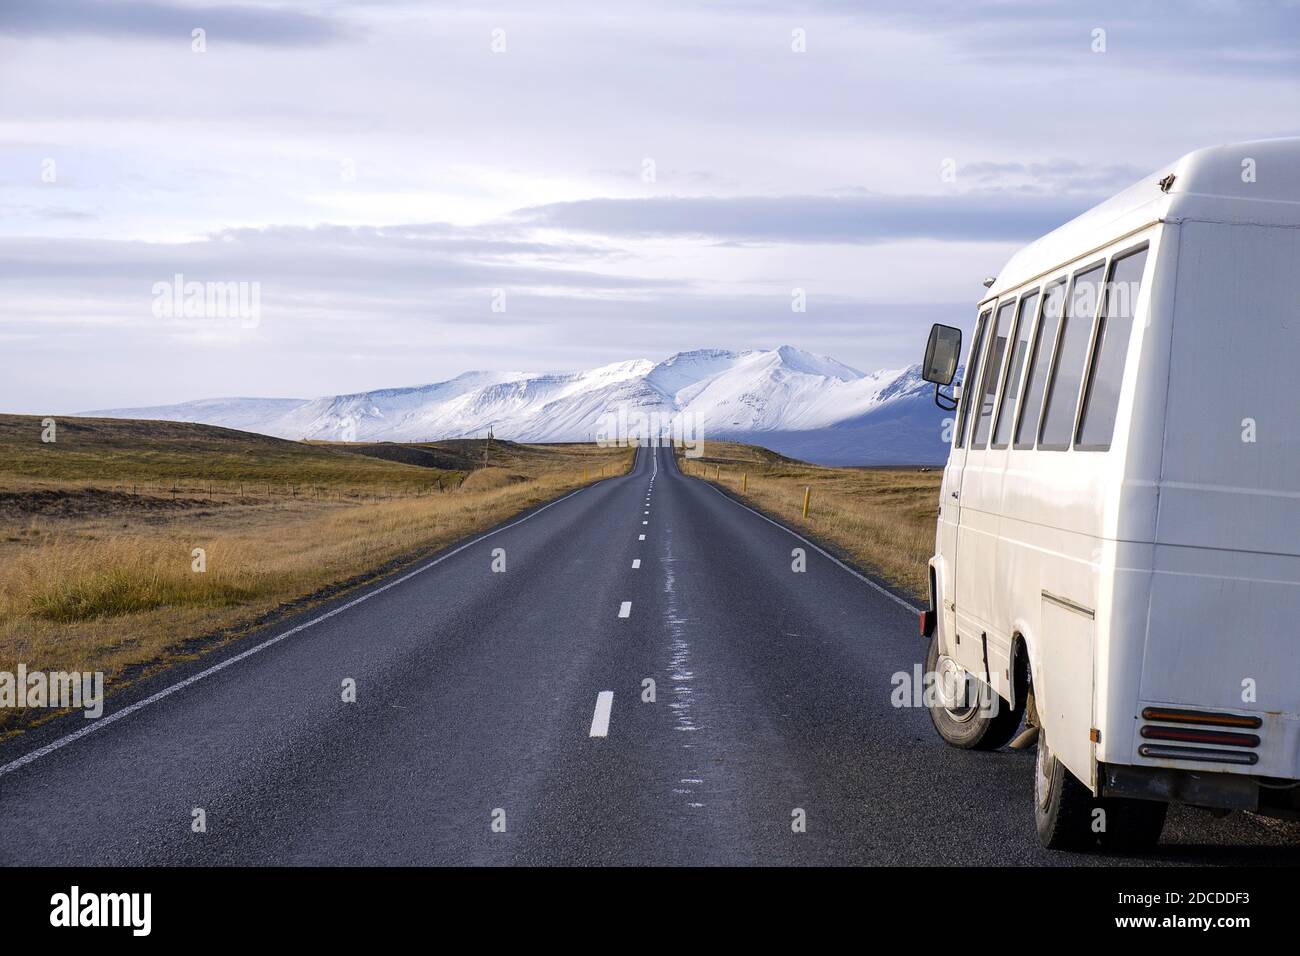 White bus on the side of a desert mountain road in Iceland Stock Photo